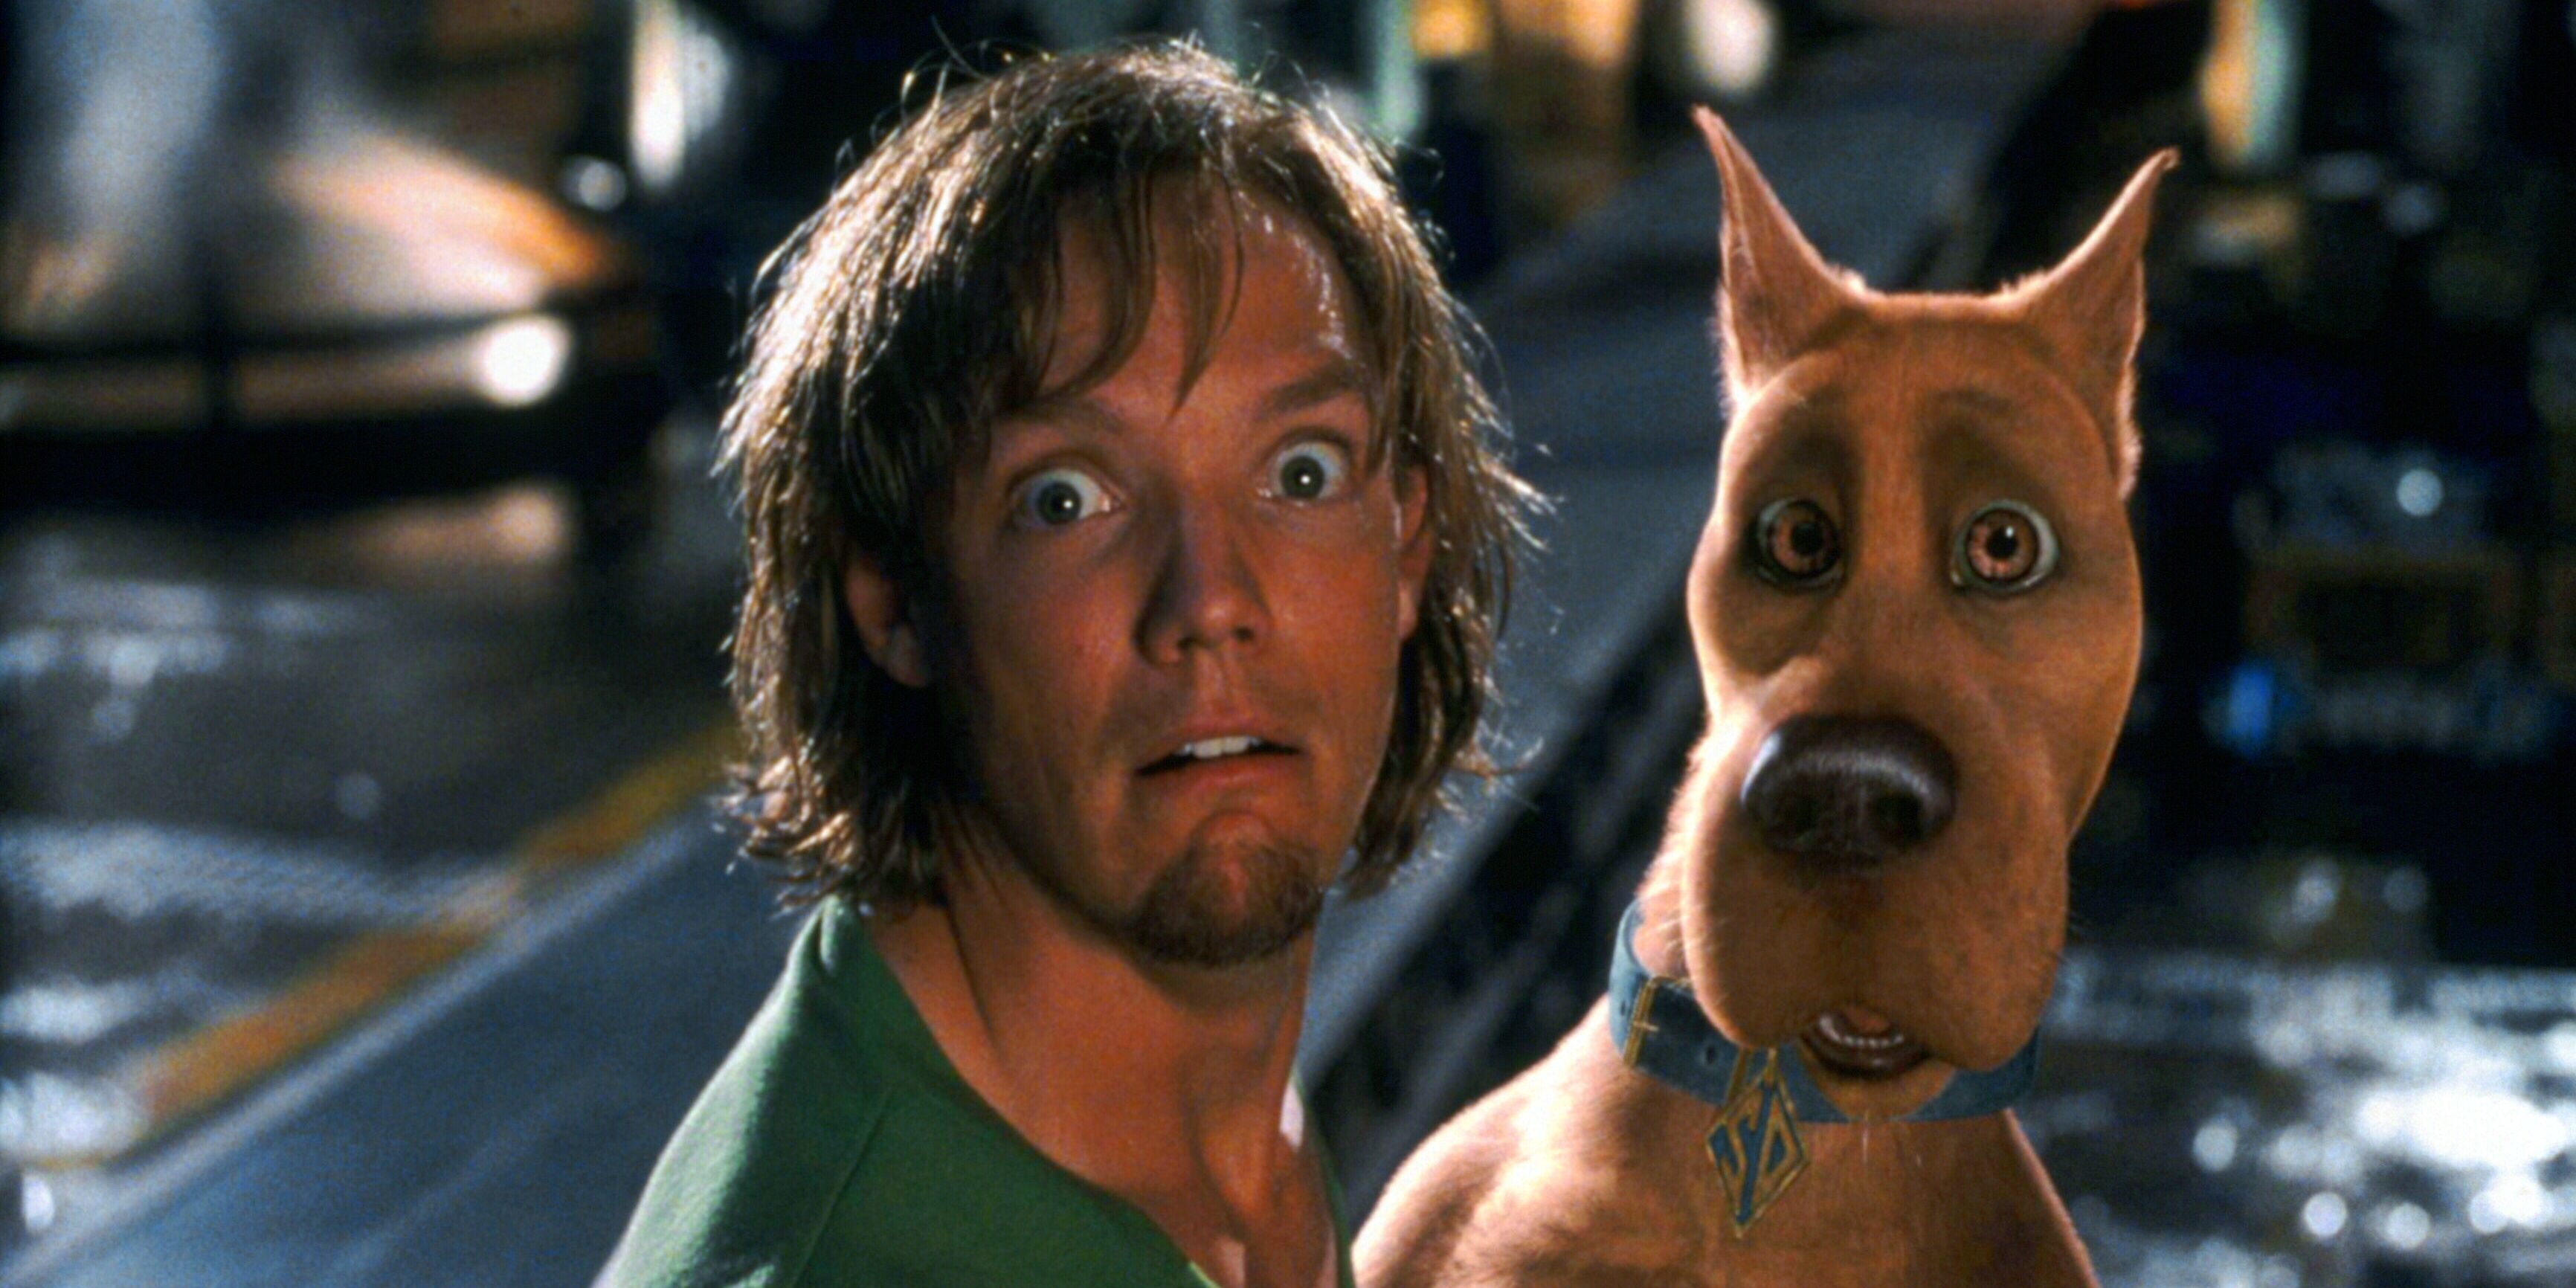 Shaggy and Scooby in Scooby-Doo 2002